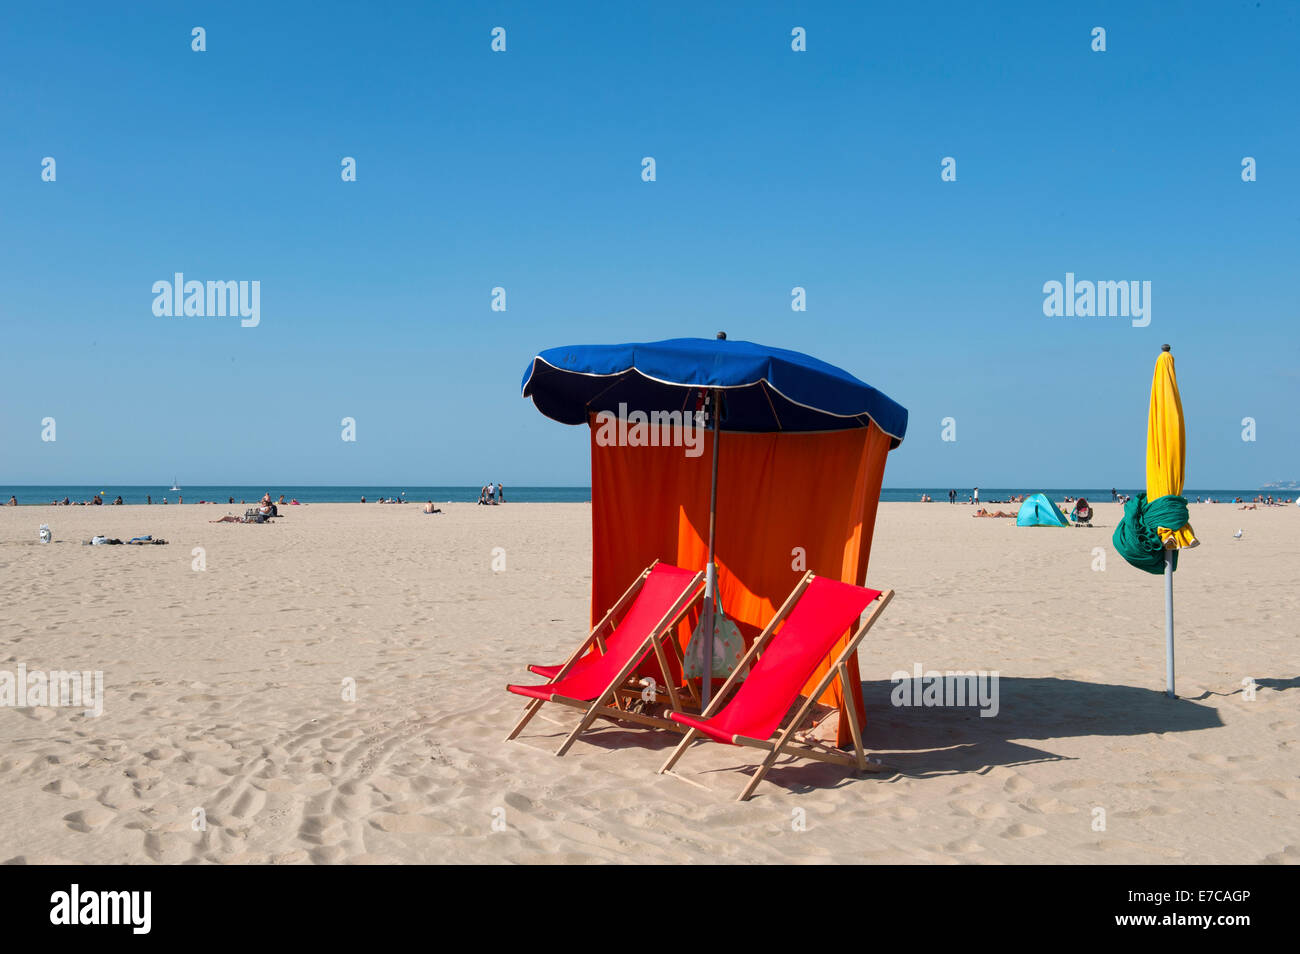 Parasols on the beach at Deauville Plage, Normandy, France Stock Photo